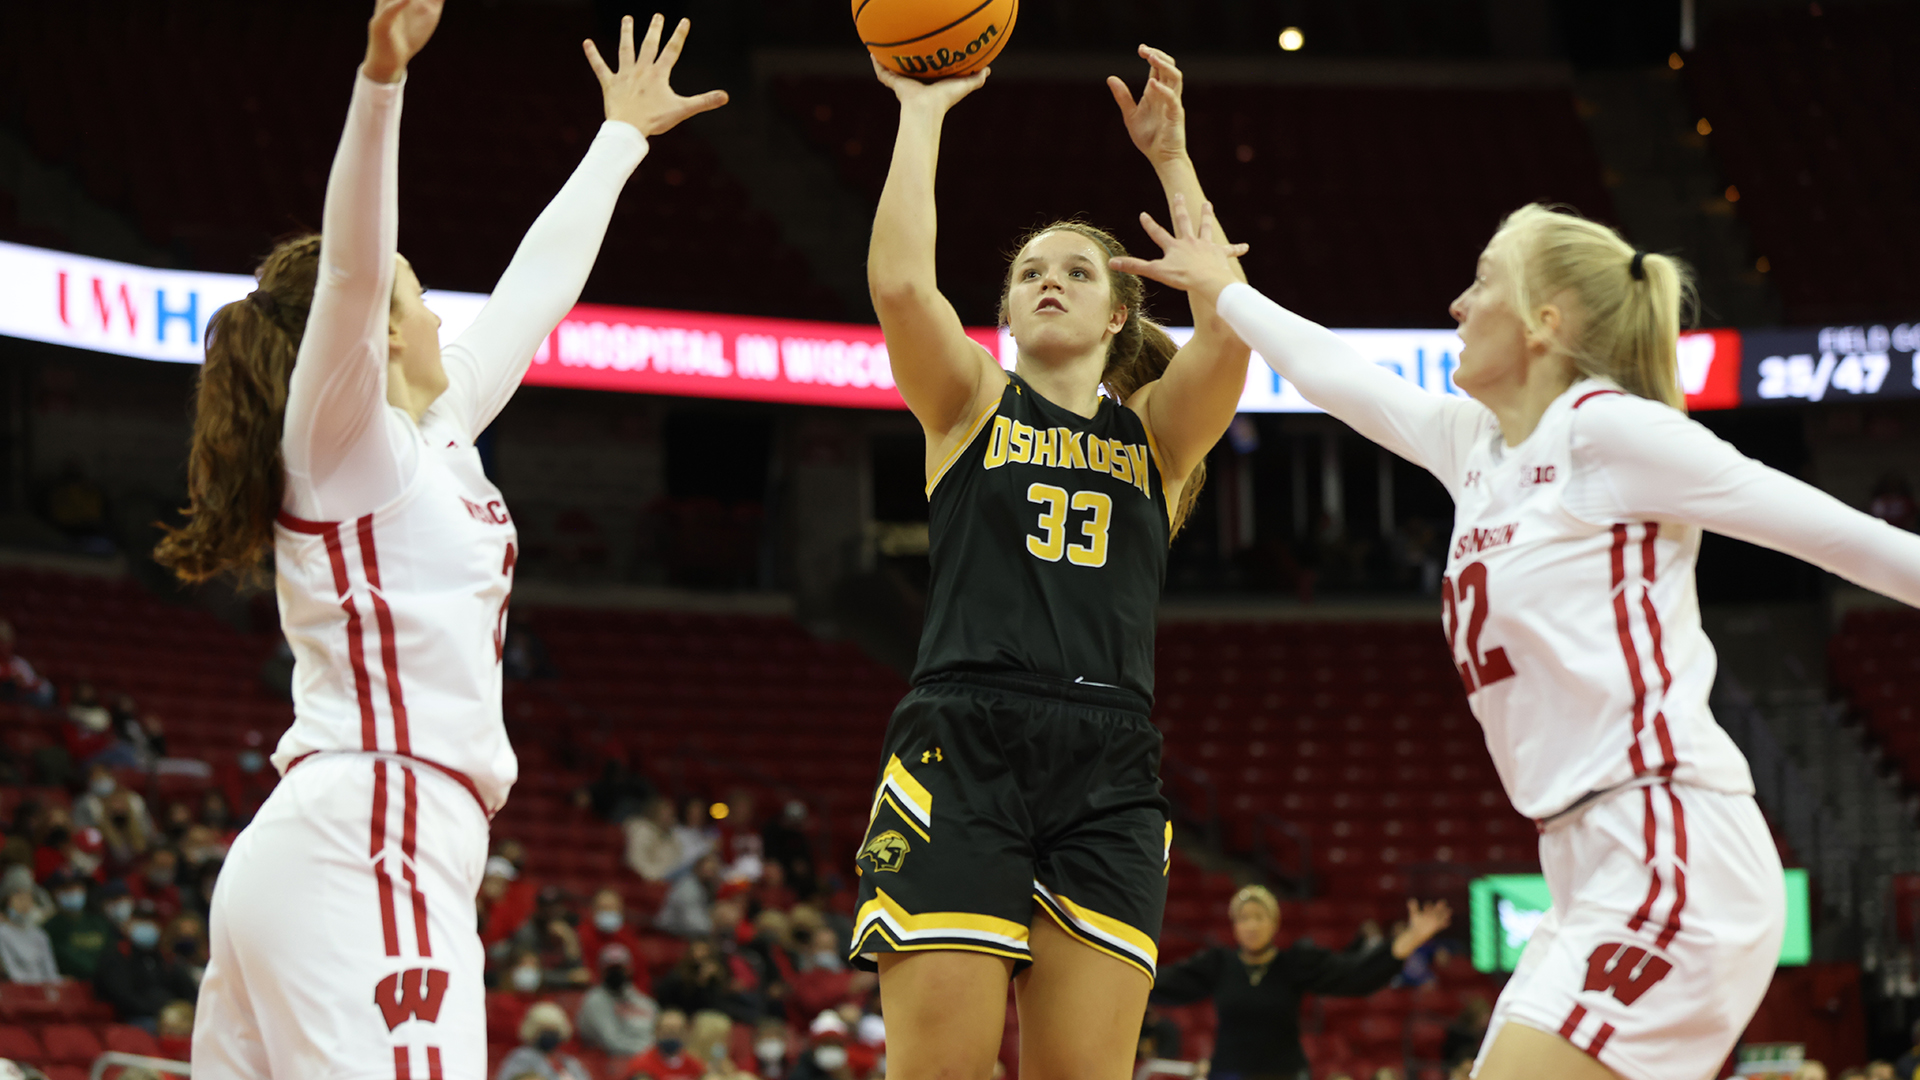 Nikki Arneson scored 12 points and grabbed two rebounds against the Badgers.